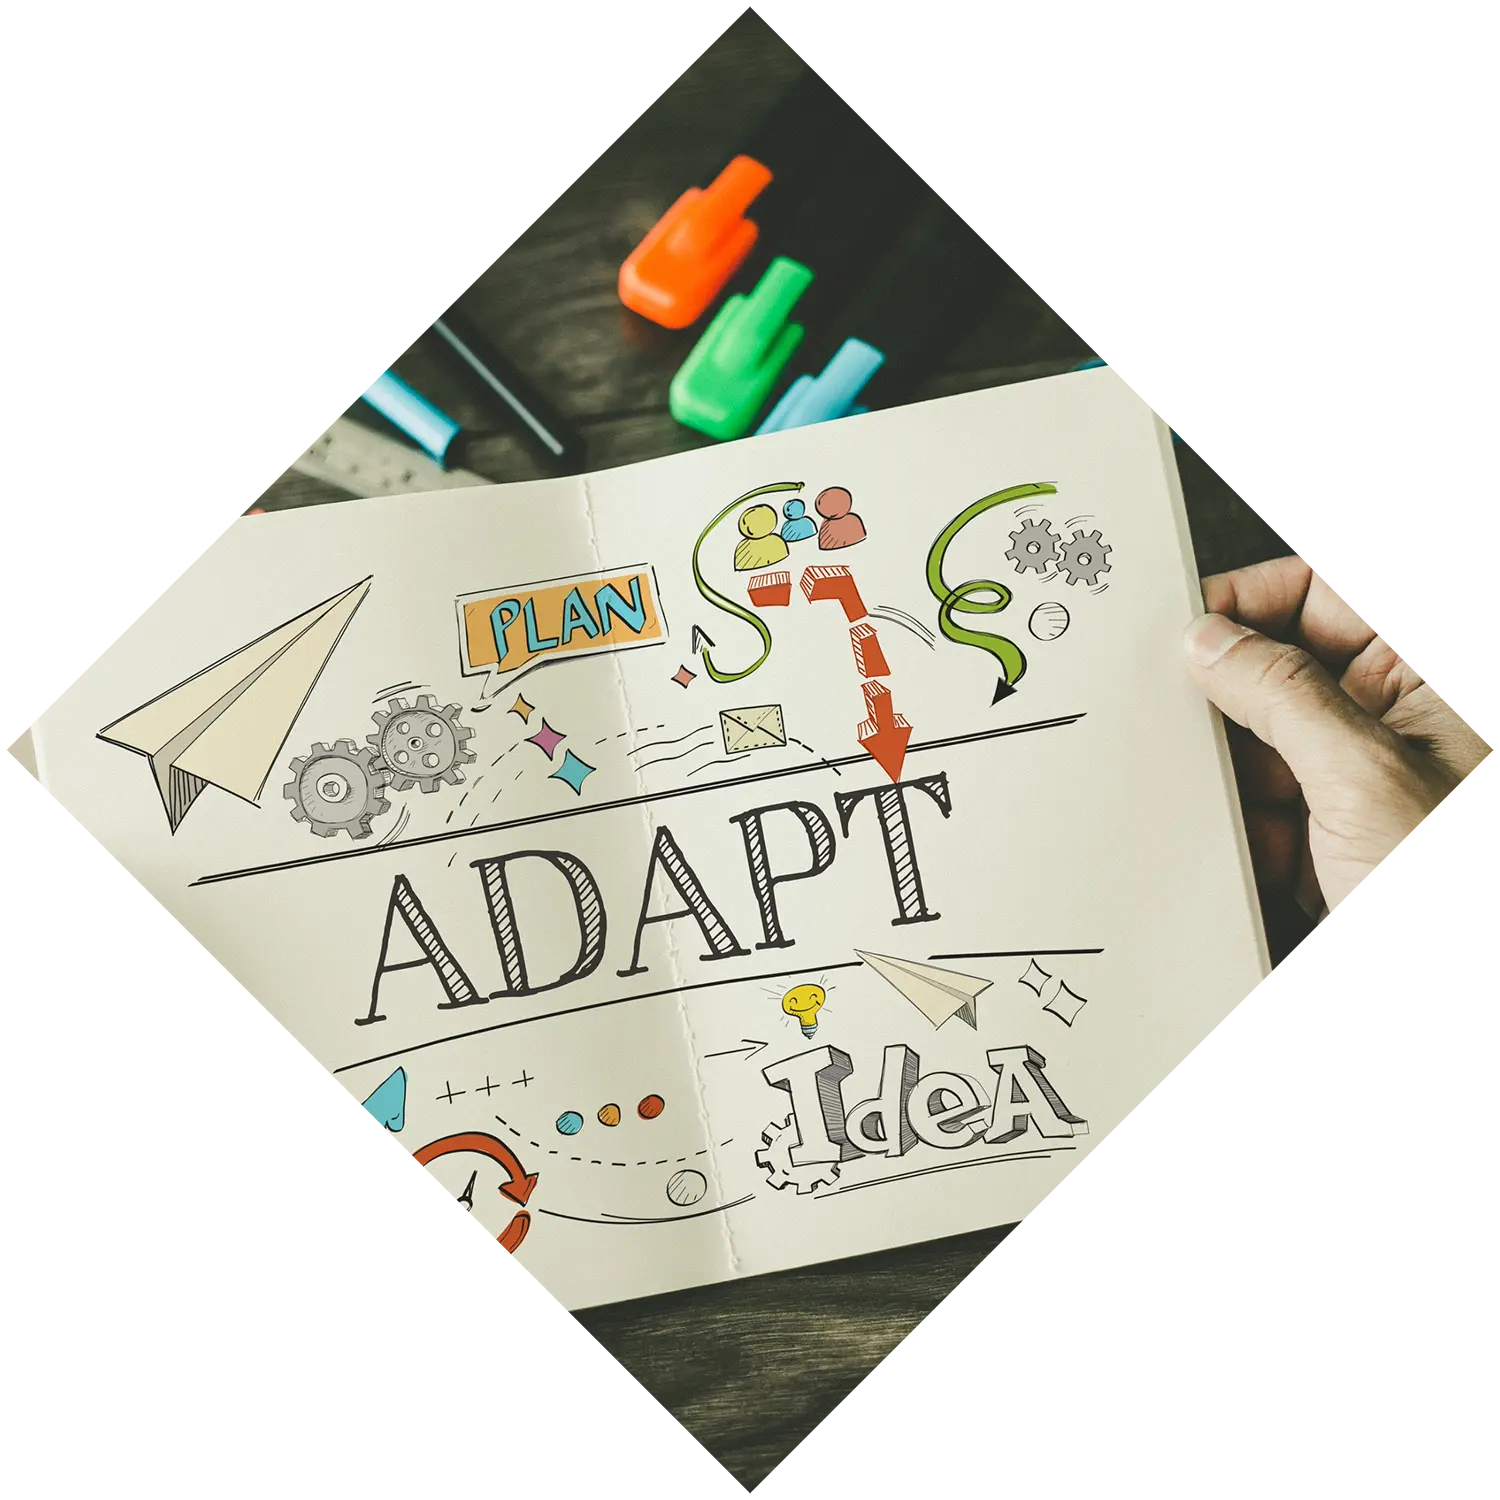 Developing Adaptive Capabilities in Business